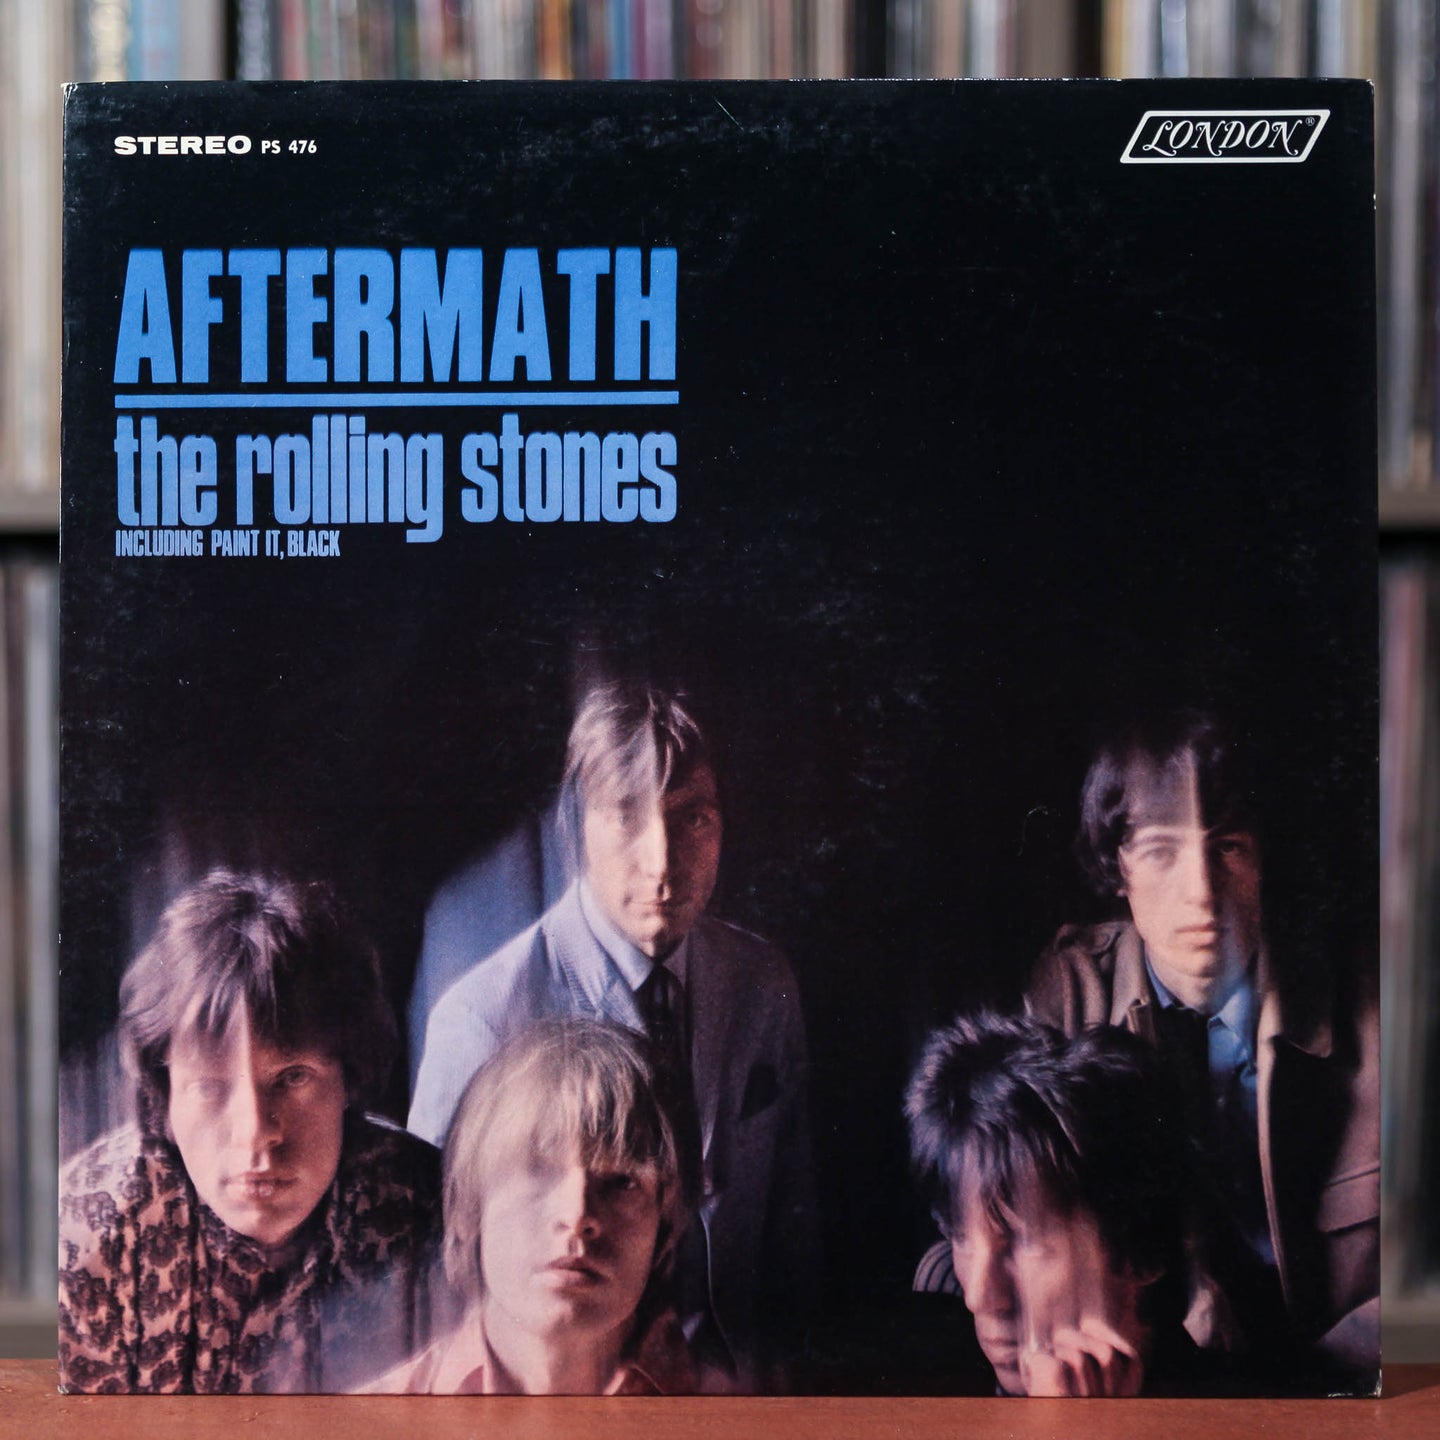 Rolling Stones - Aftermath - 1966 London, EX/VG+